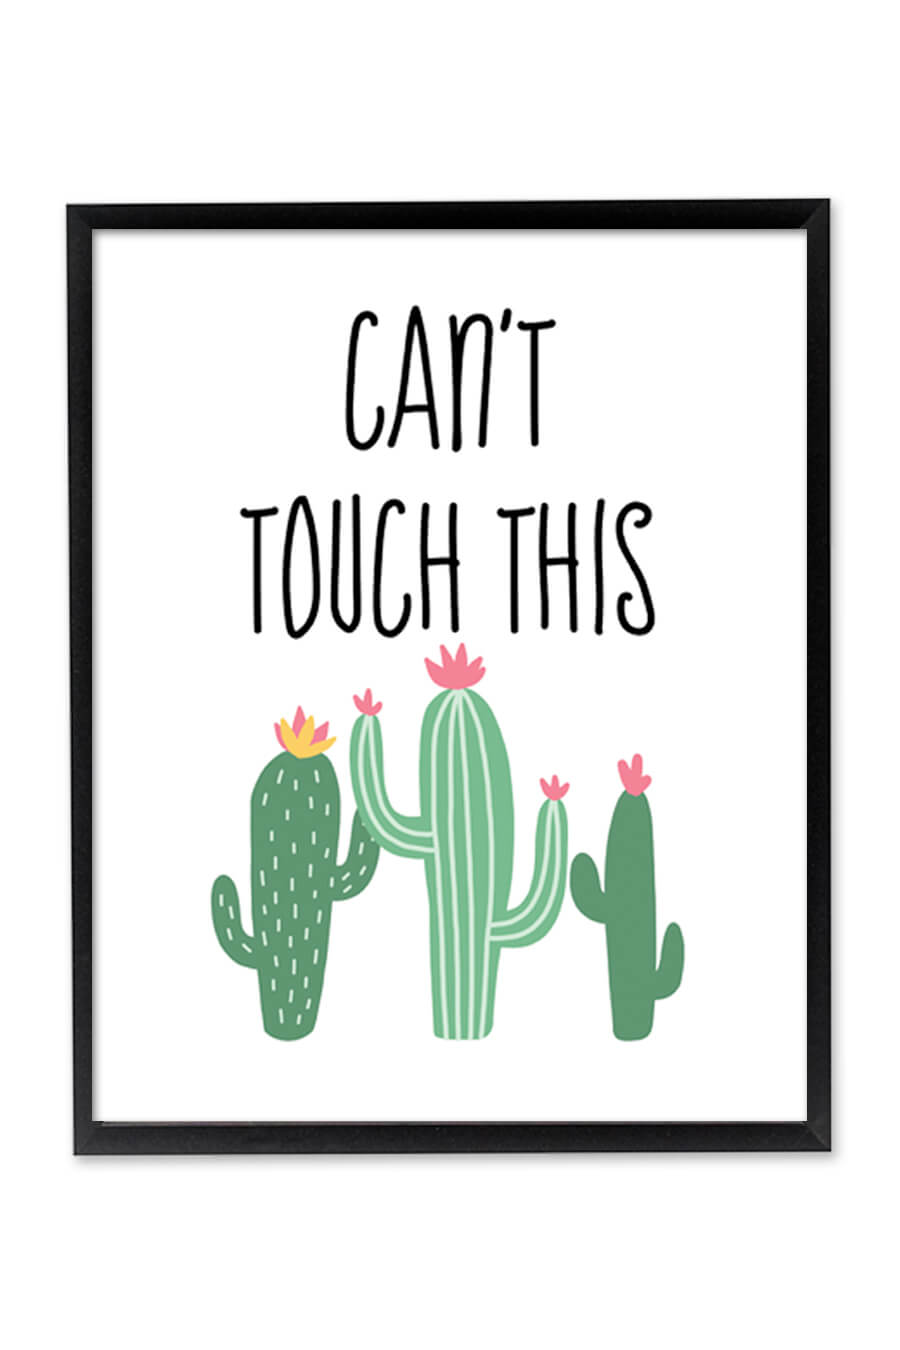 don't touch me print funny cactus quote a4 glossy picture gift wall art unframed 